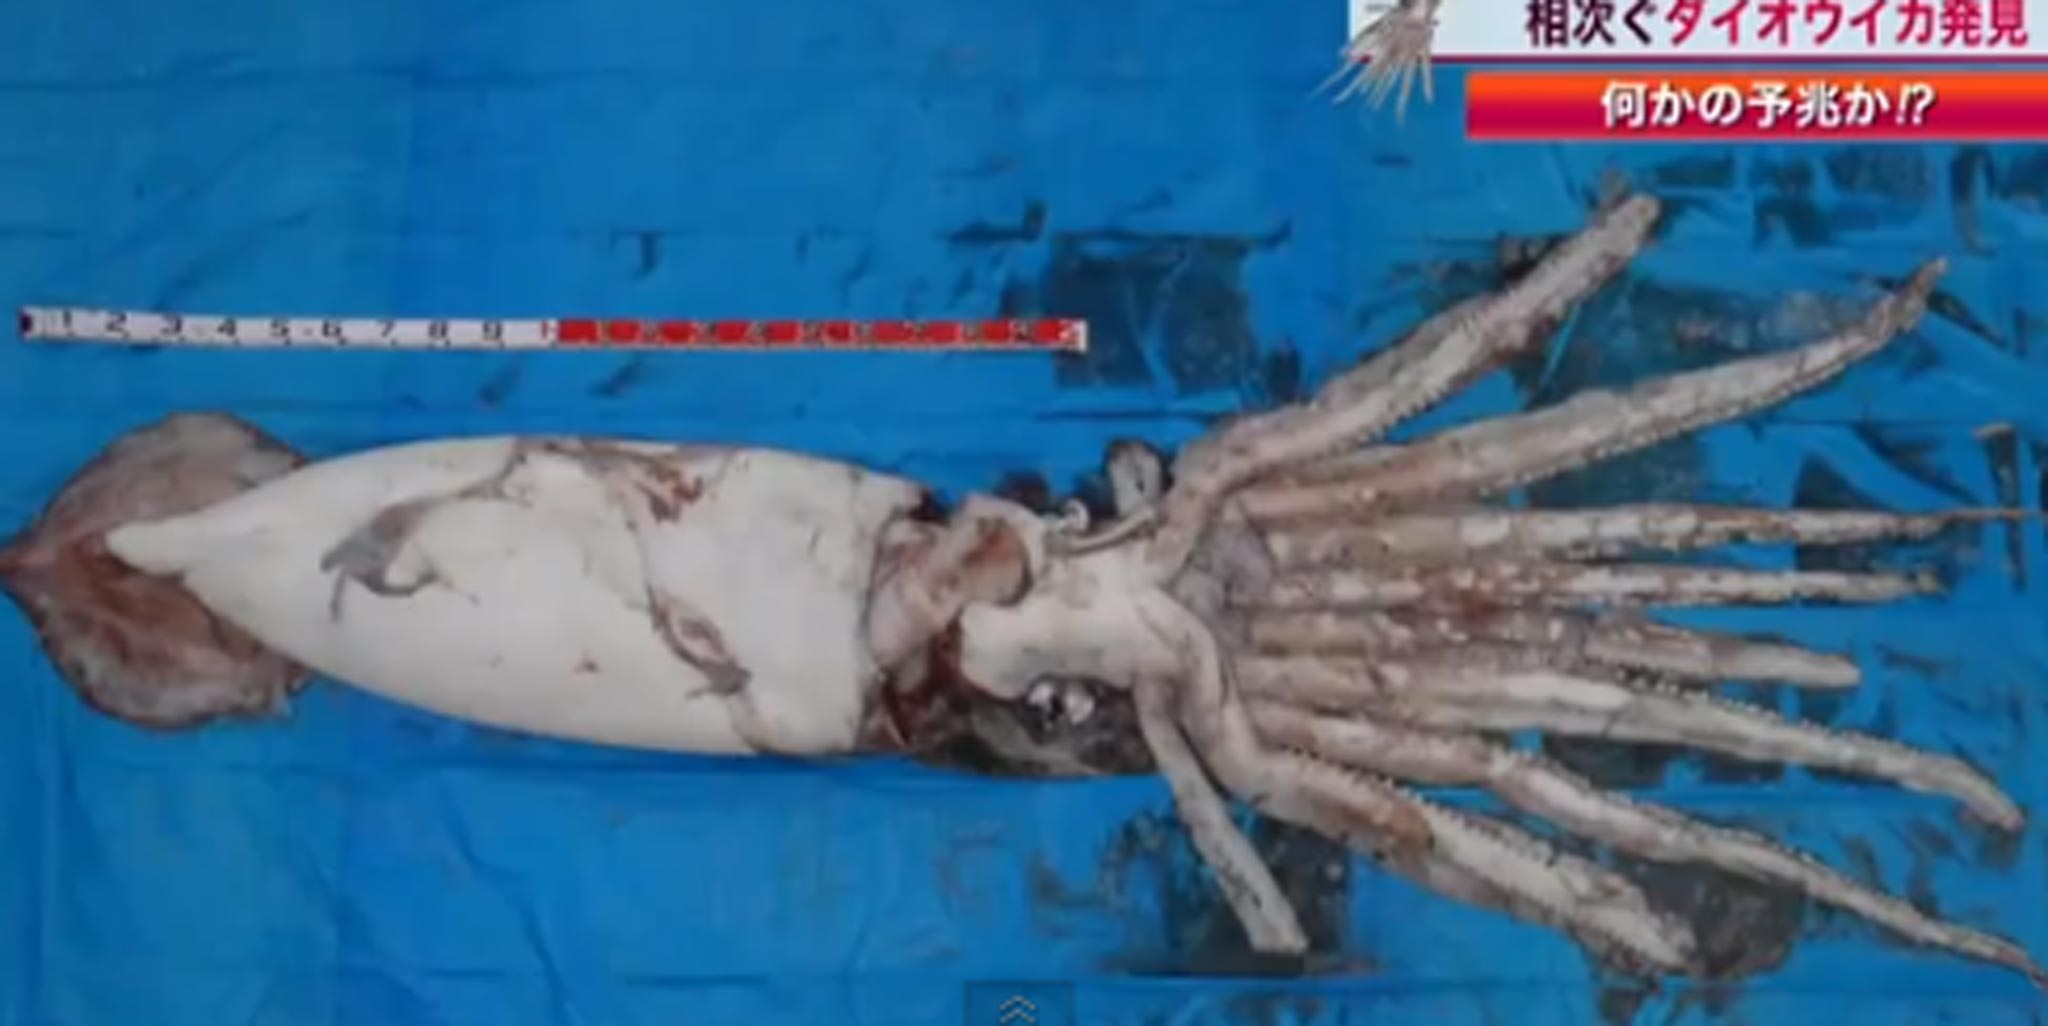 The giant squid which was caught off the coast of Japan last week